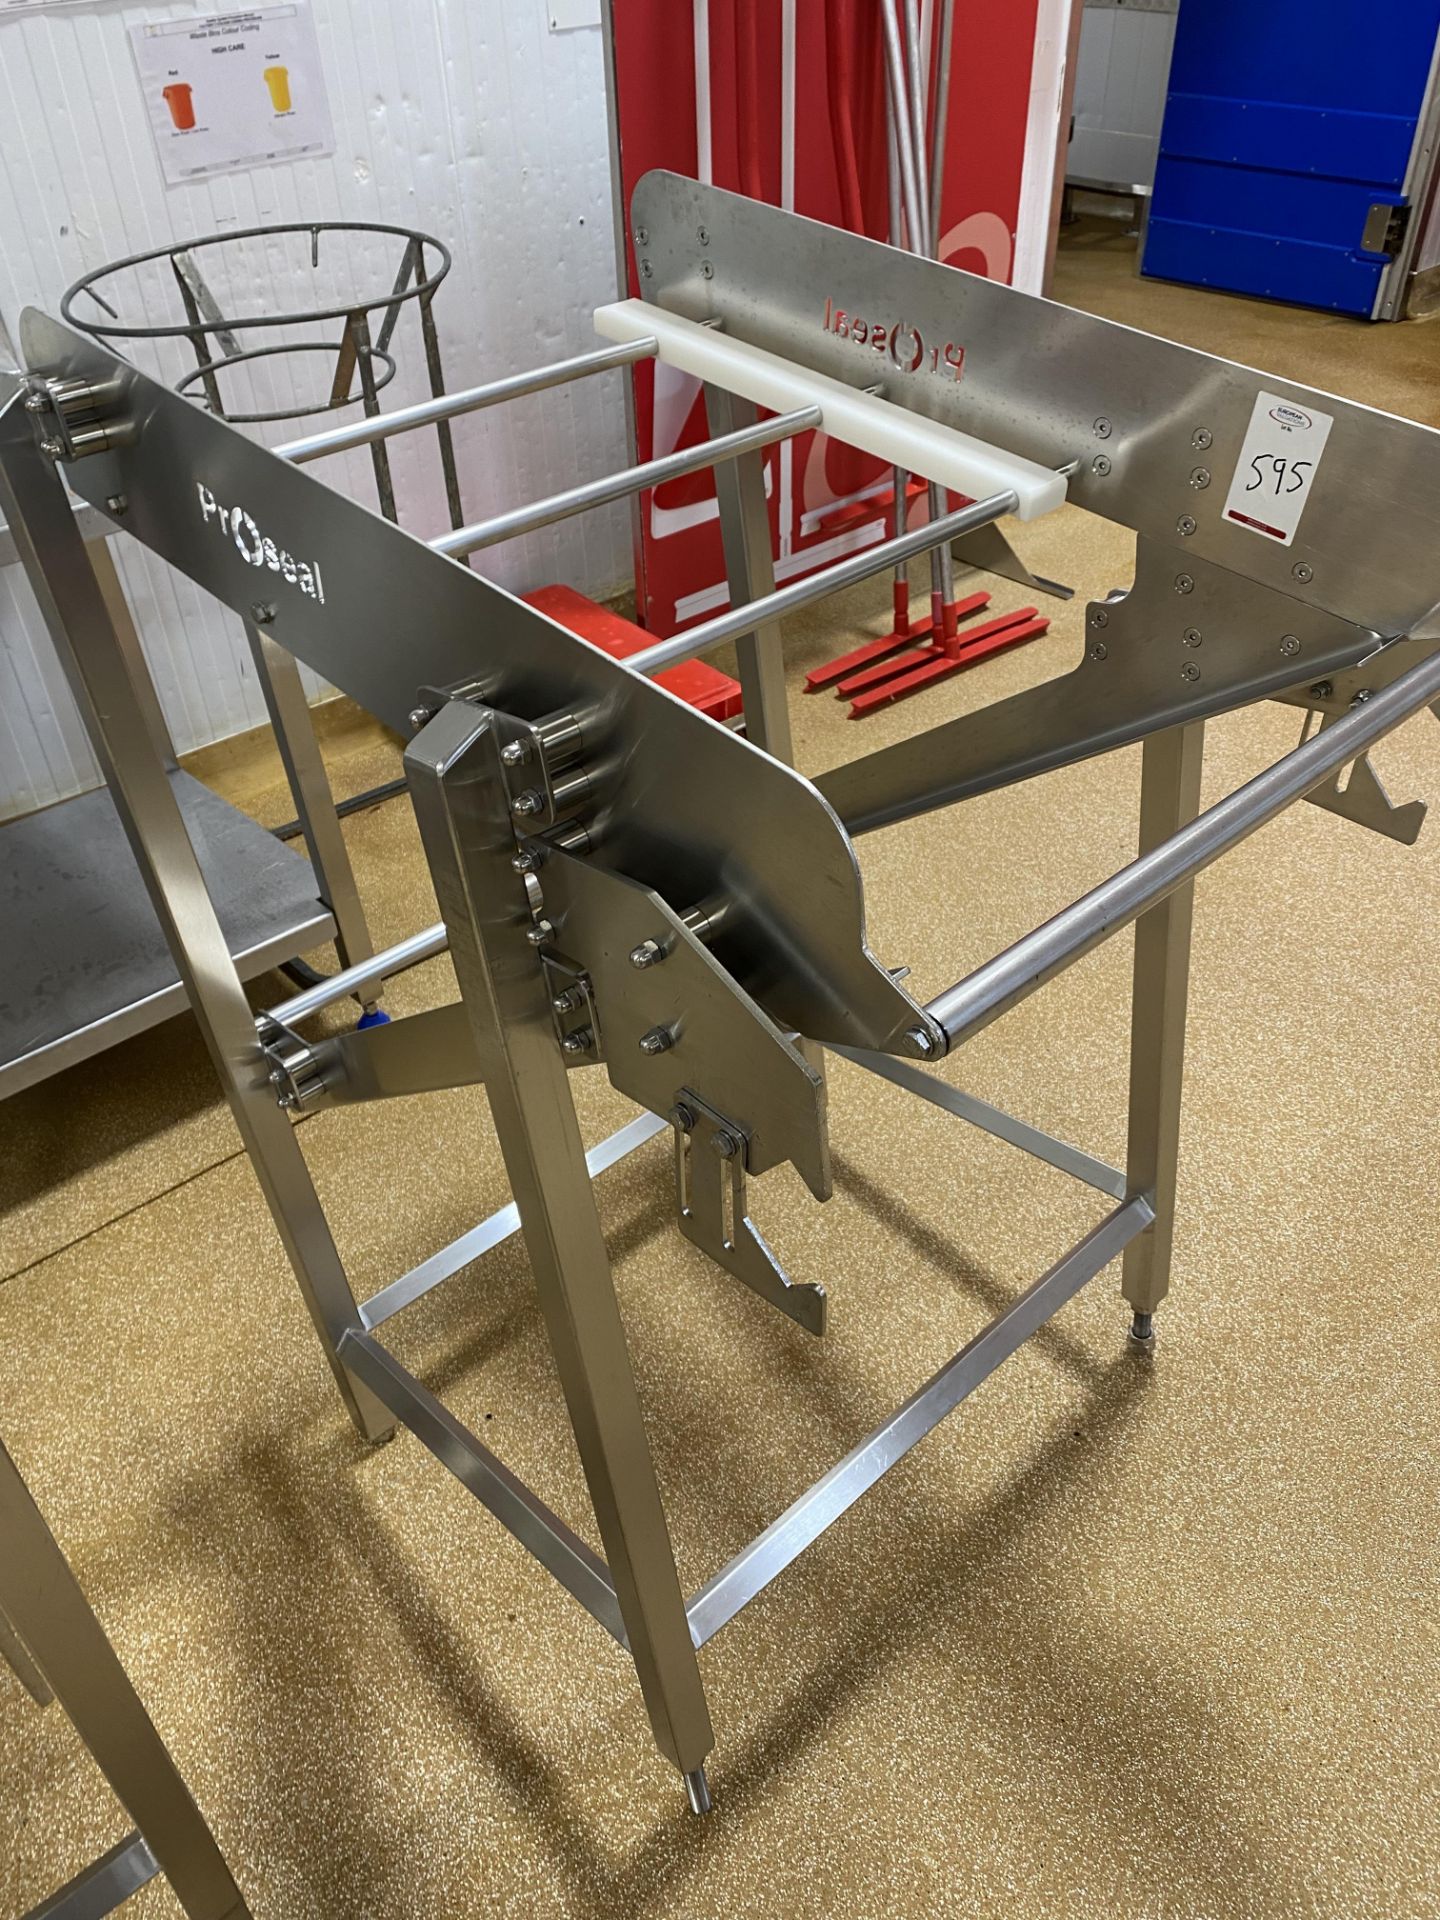 Proseal stainless steel tray picking unit